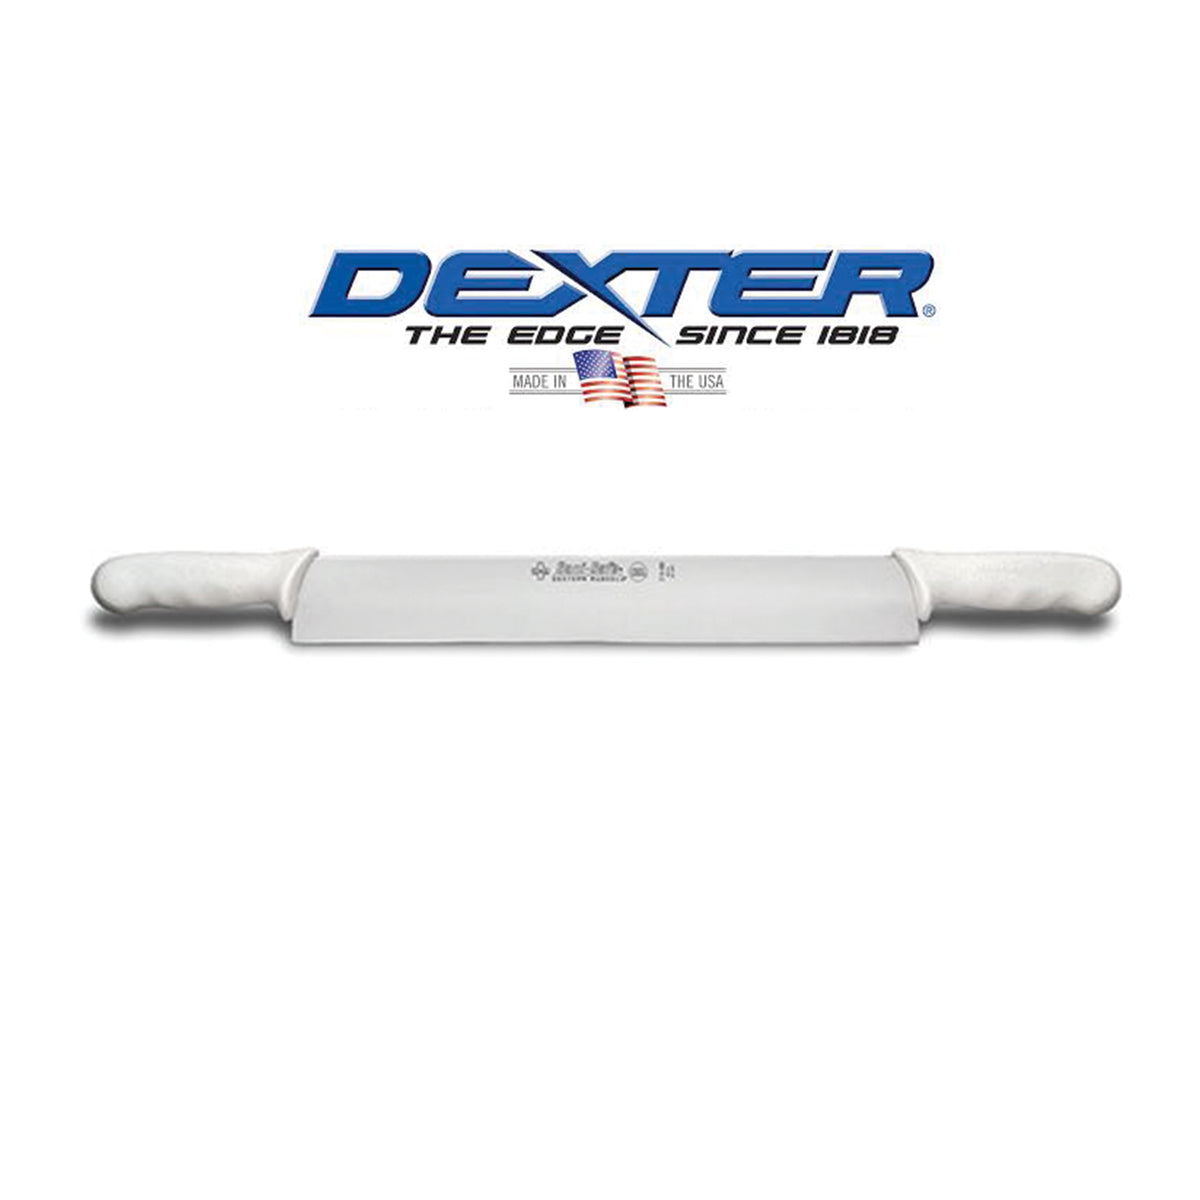 Dexter S118-14DH Double Handle Cheese Knife